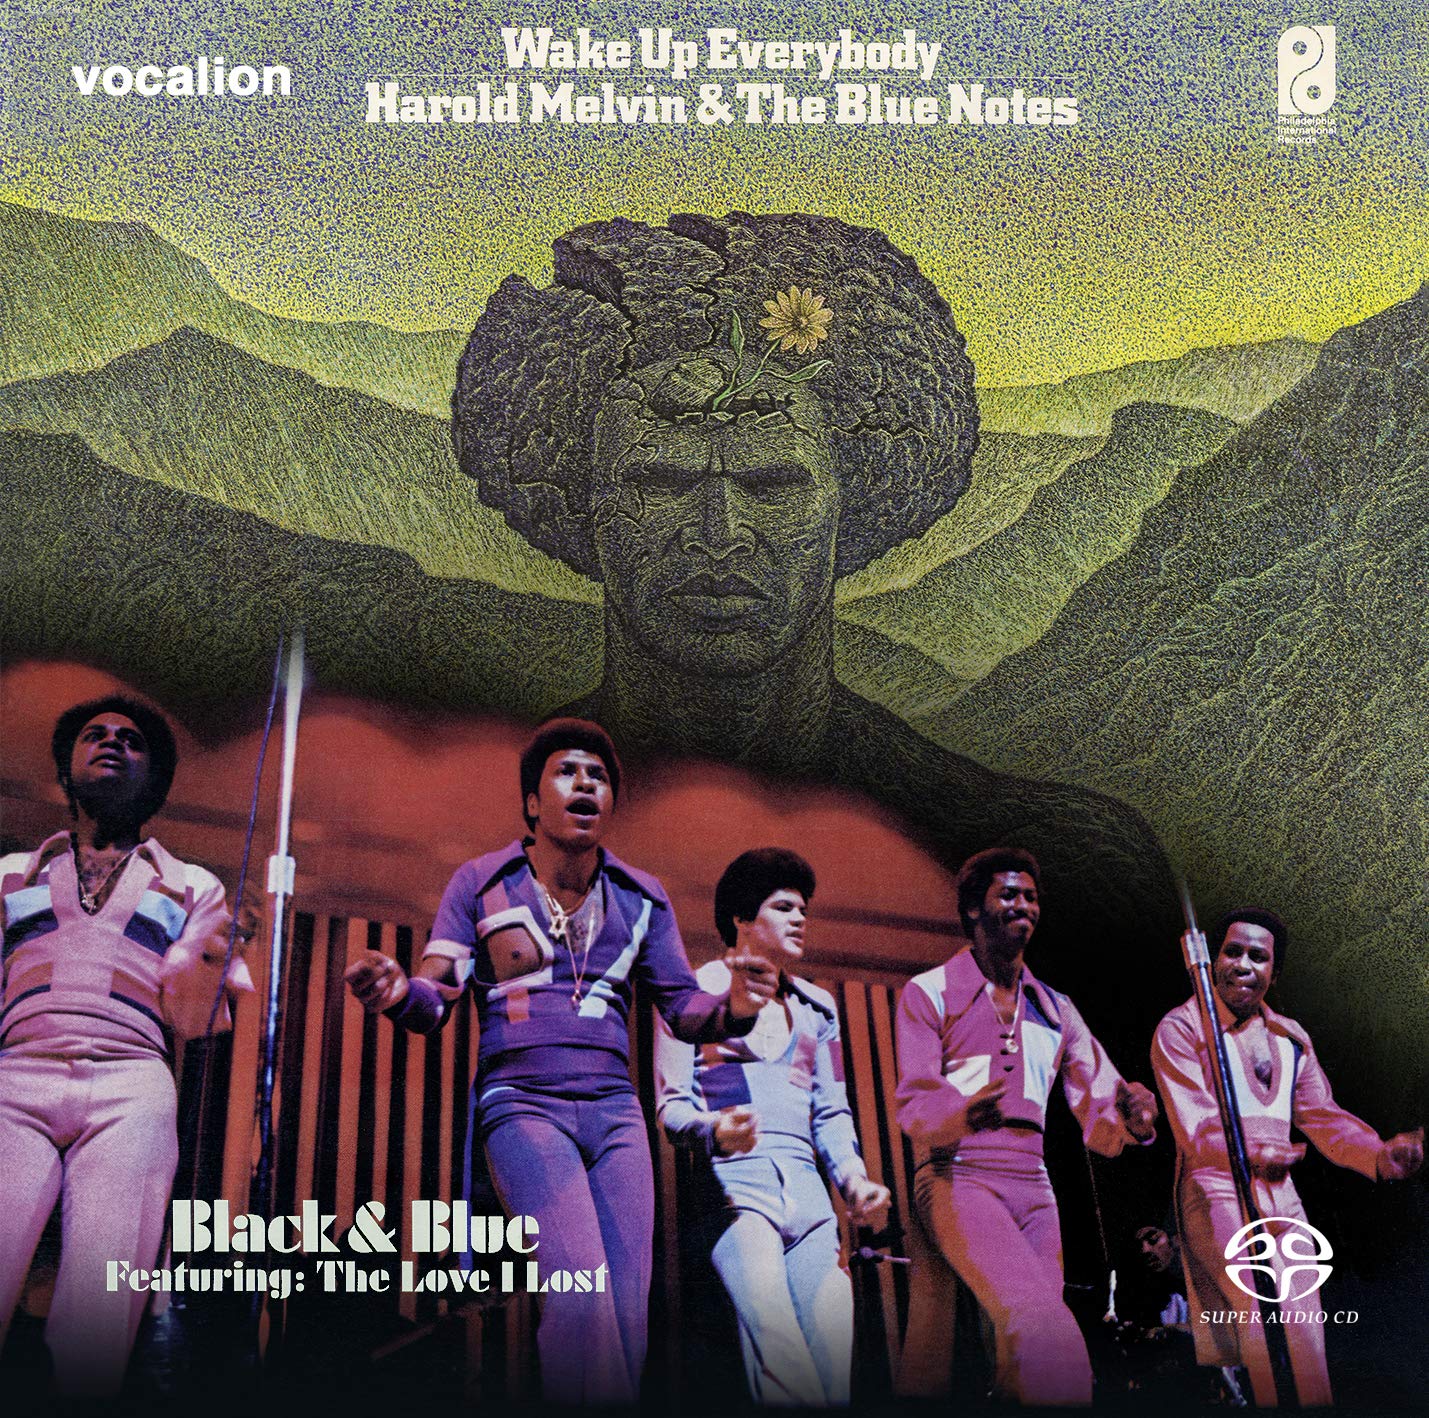 Harold Melvin & The Blue Notes – Black & Blue & Wake Up Everybody (1973 & 1975) [Reissue 2020] MCH SACD ISO + FLAC 24bit/96kHz